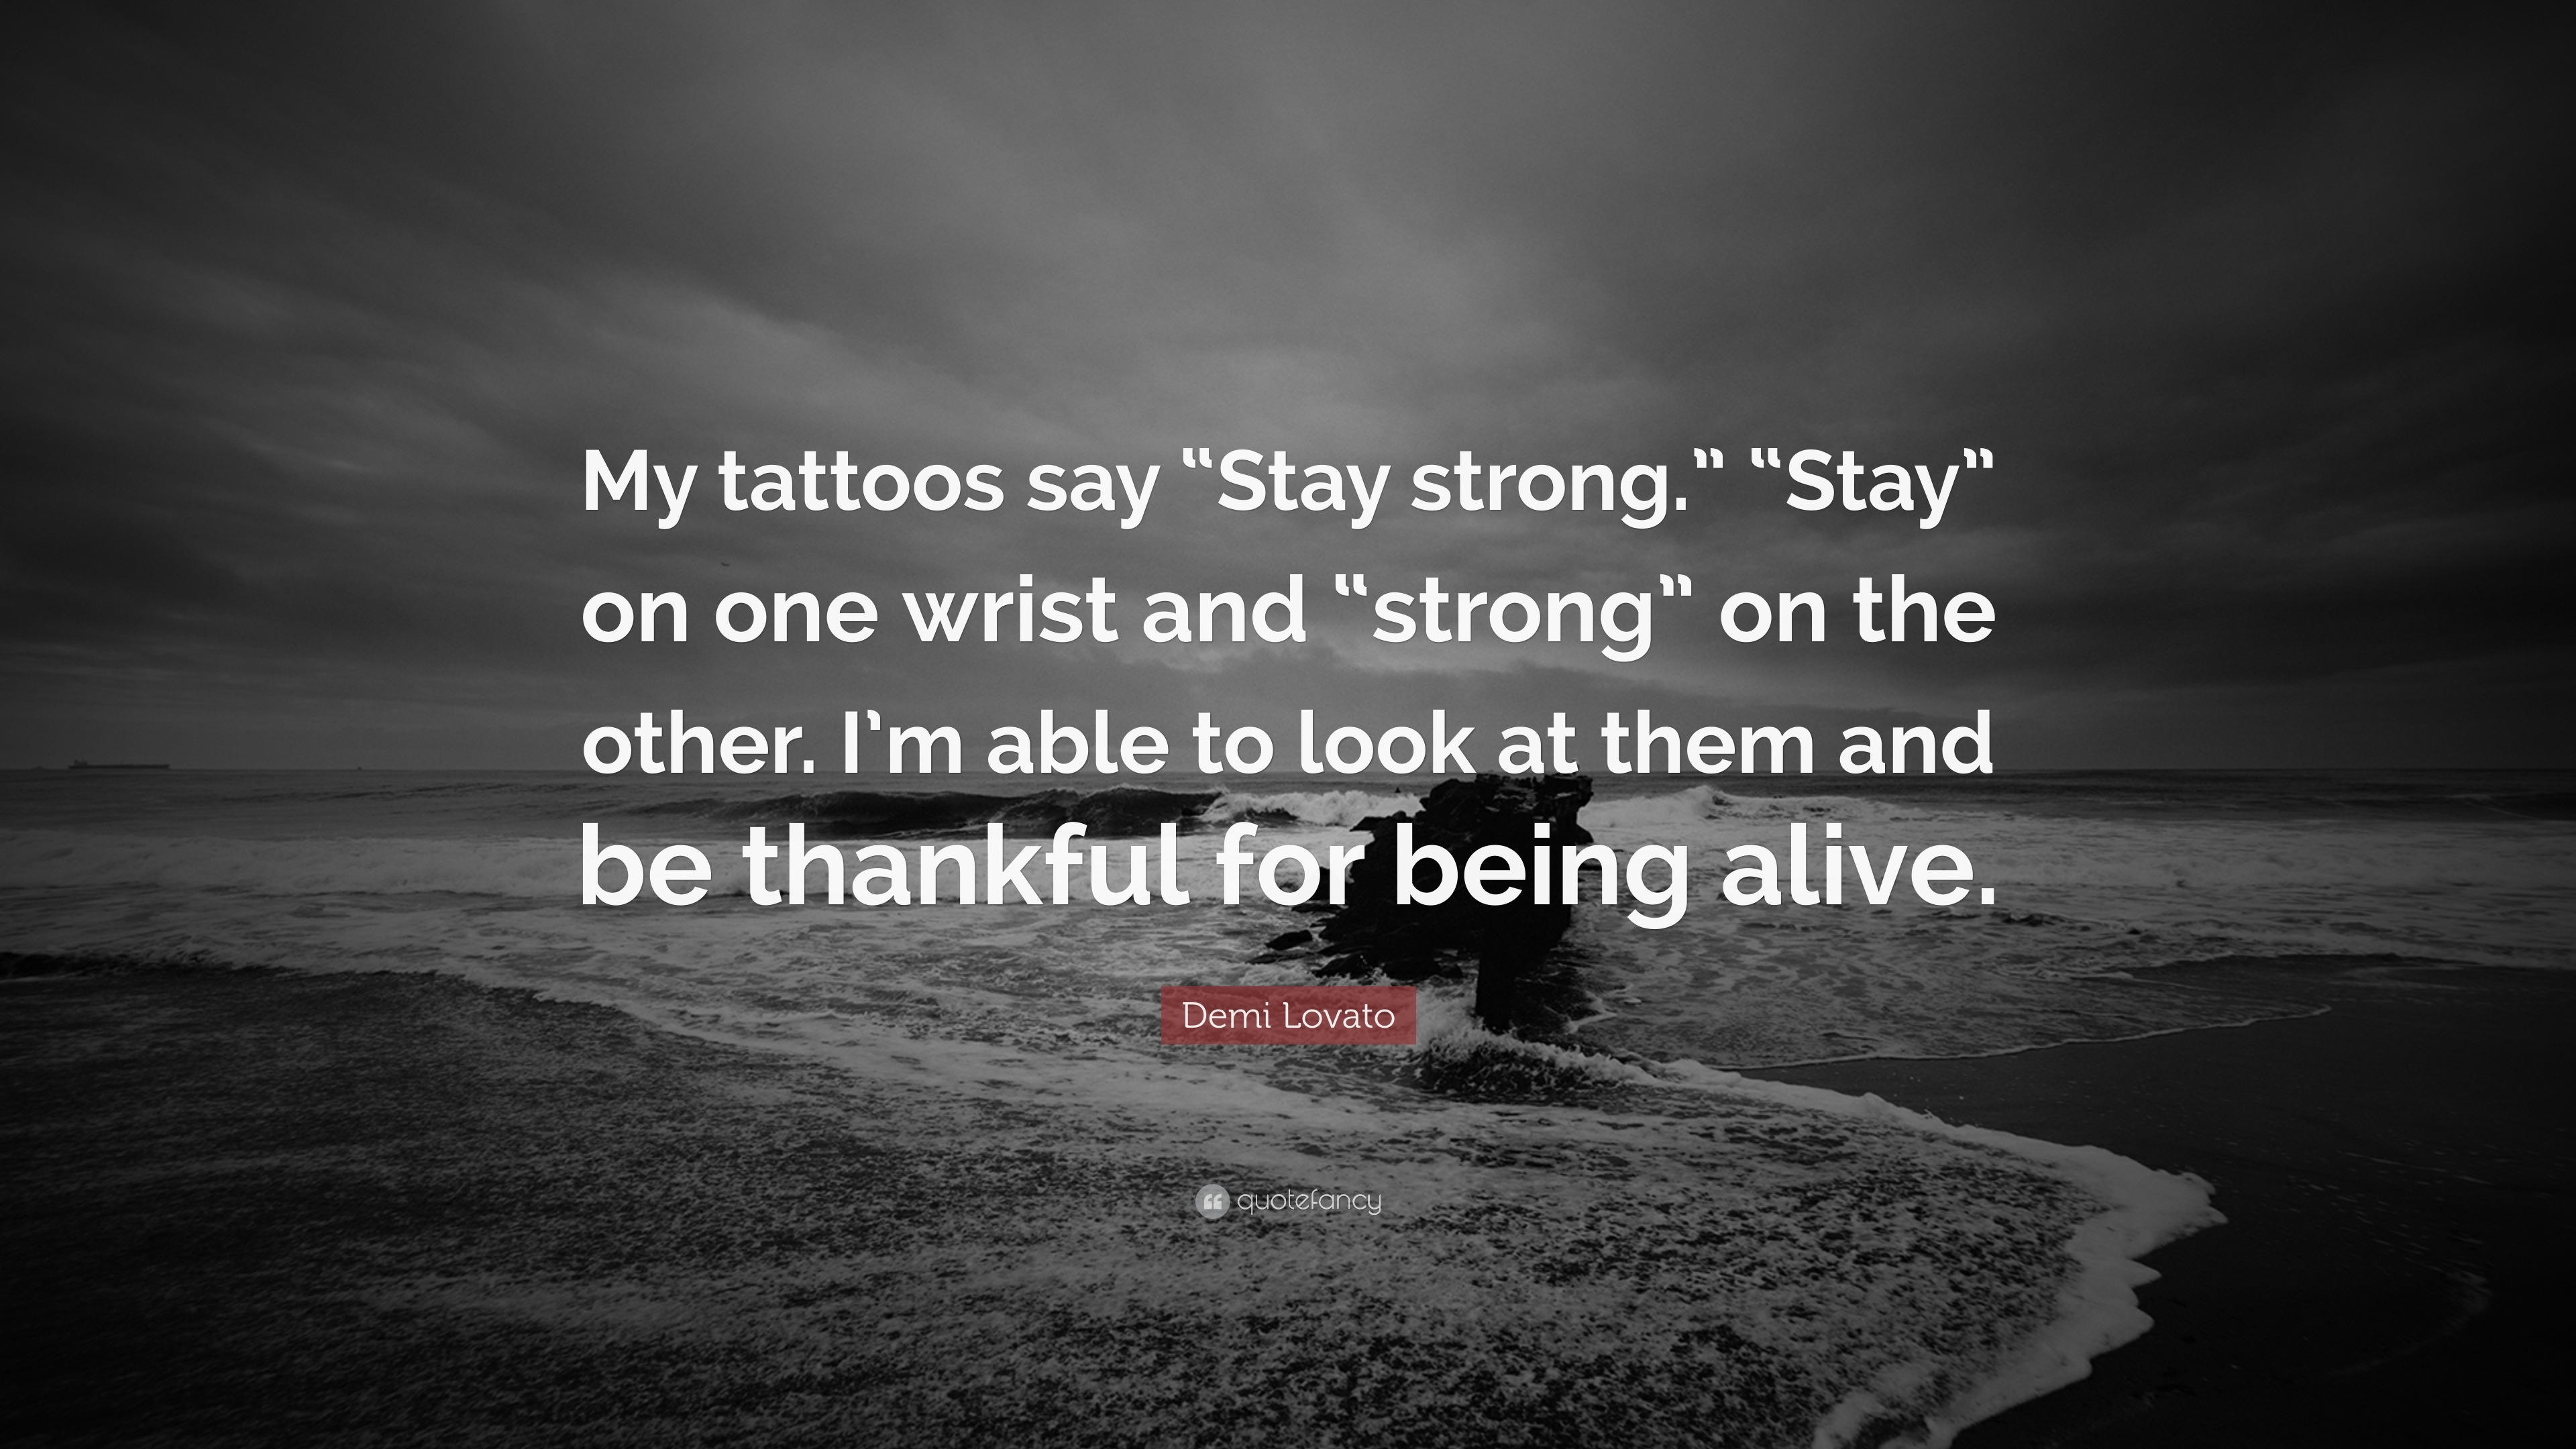 Quotes To Get As Tattoos QuotesGram